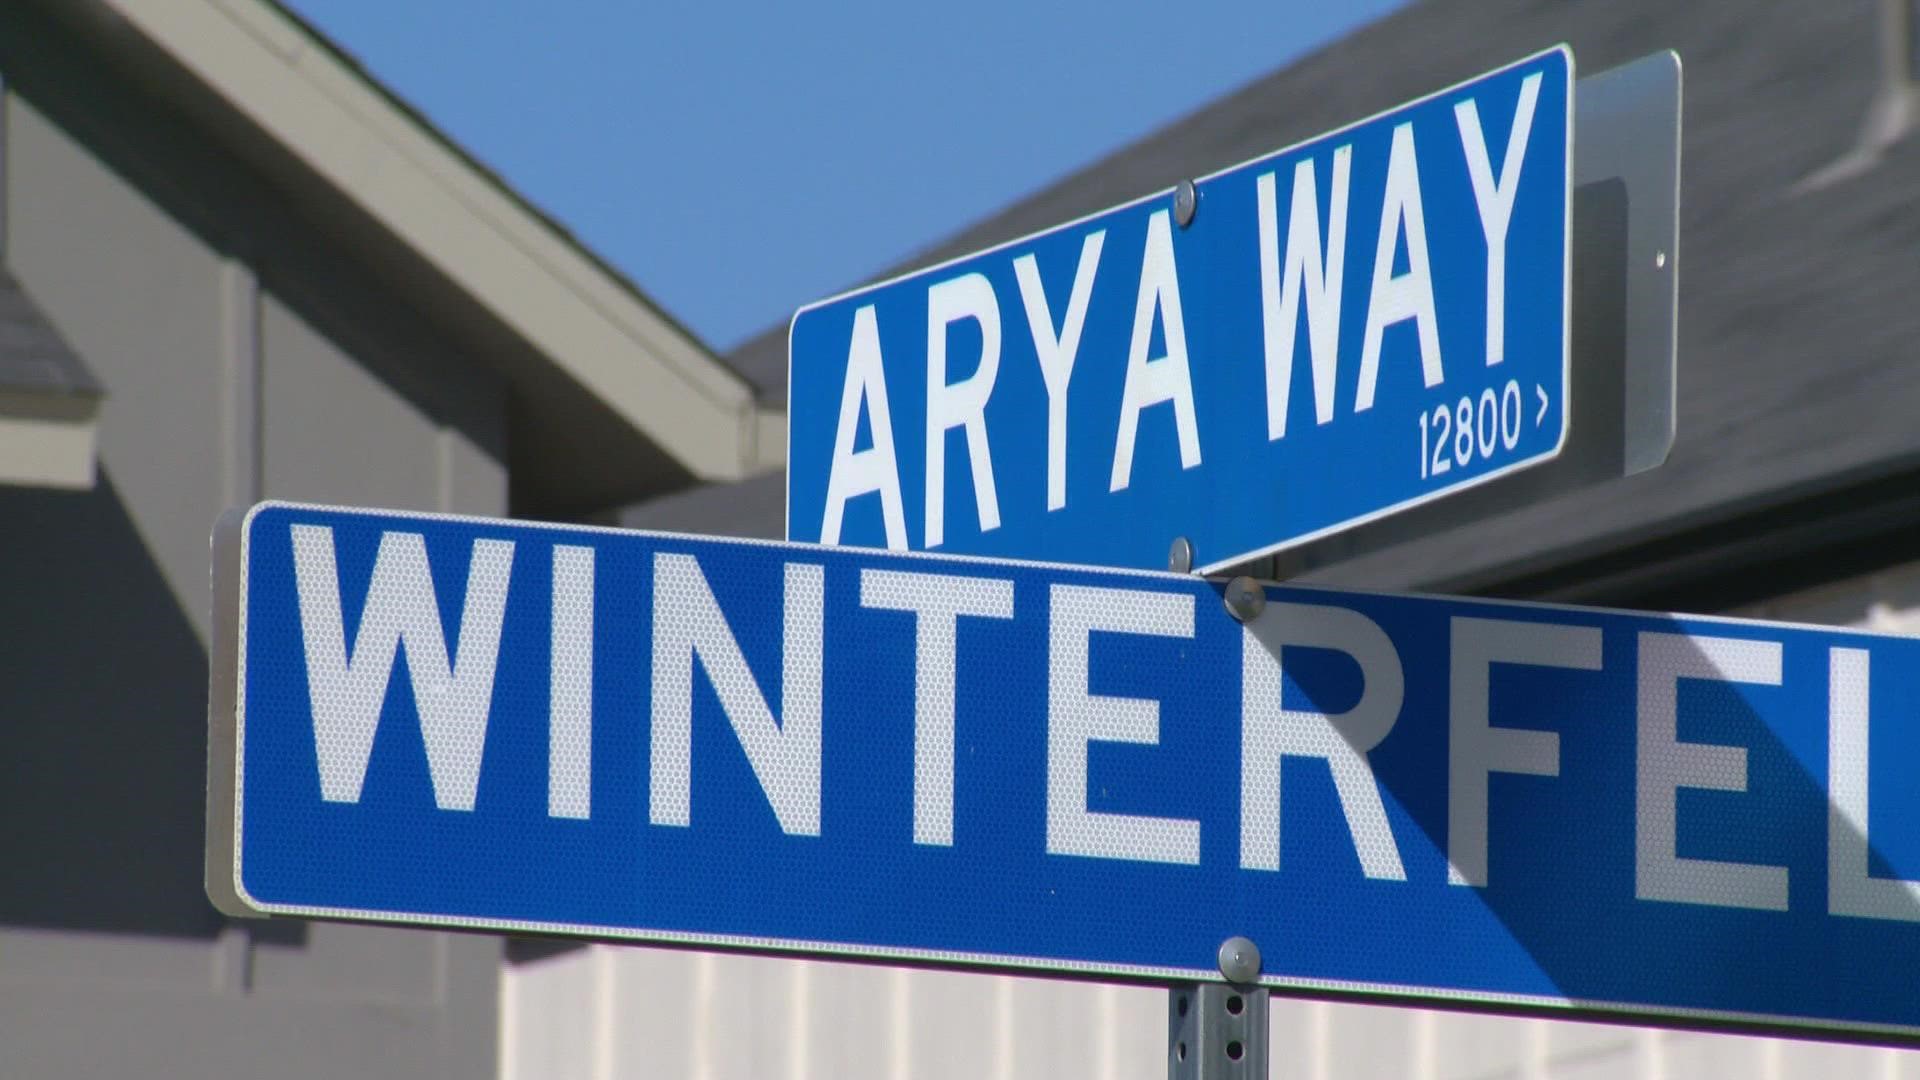 Would you rather reign over Westeros Path or Arya Way?